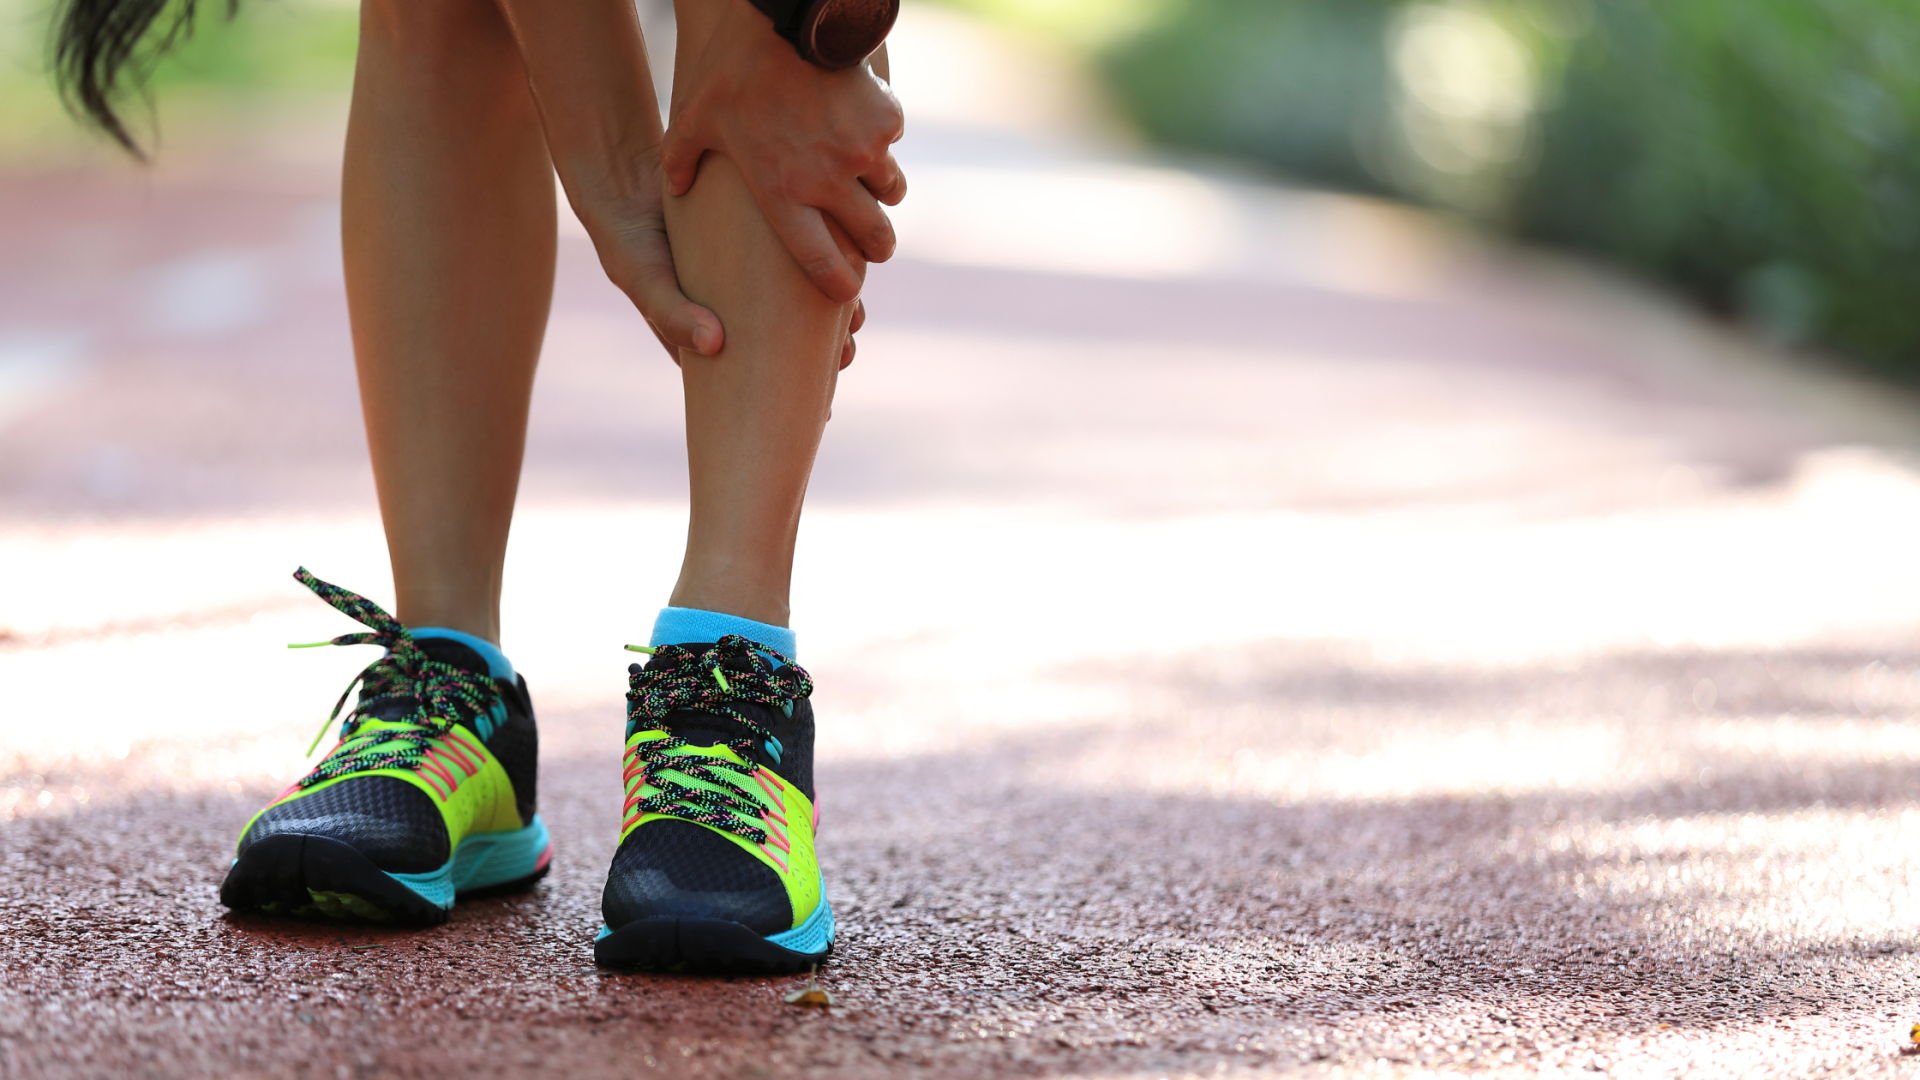 Leg pain when exercising is common and often referred to as shin splints.